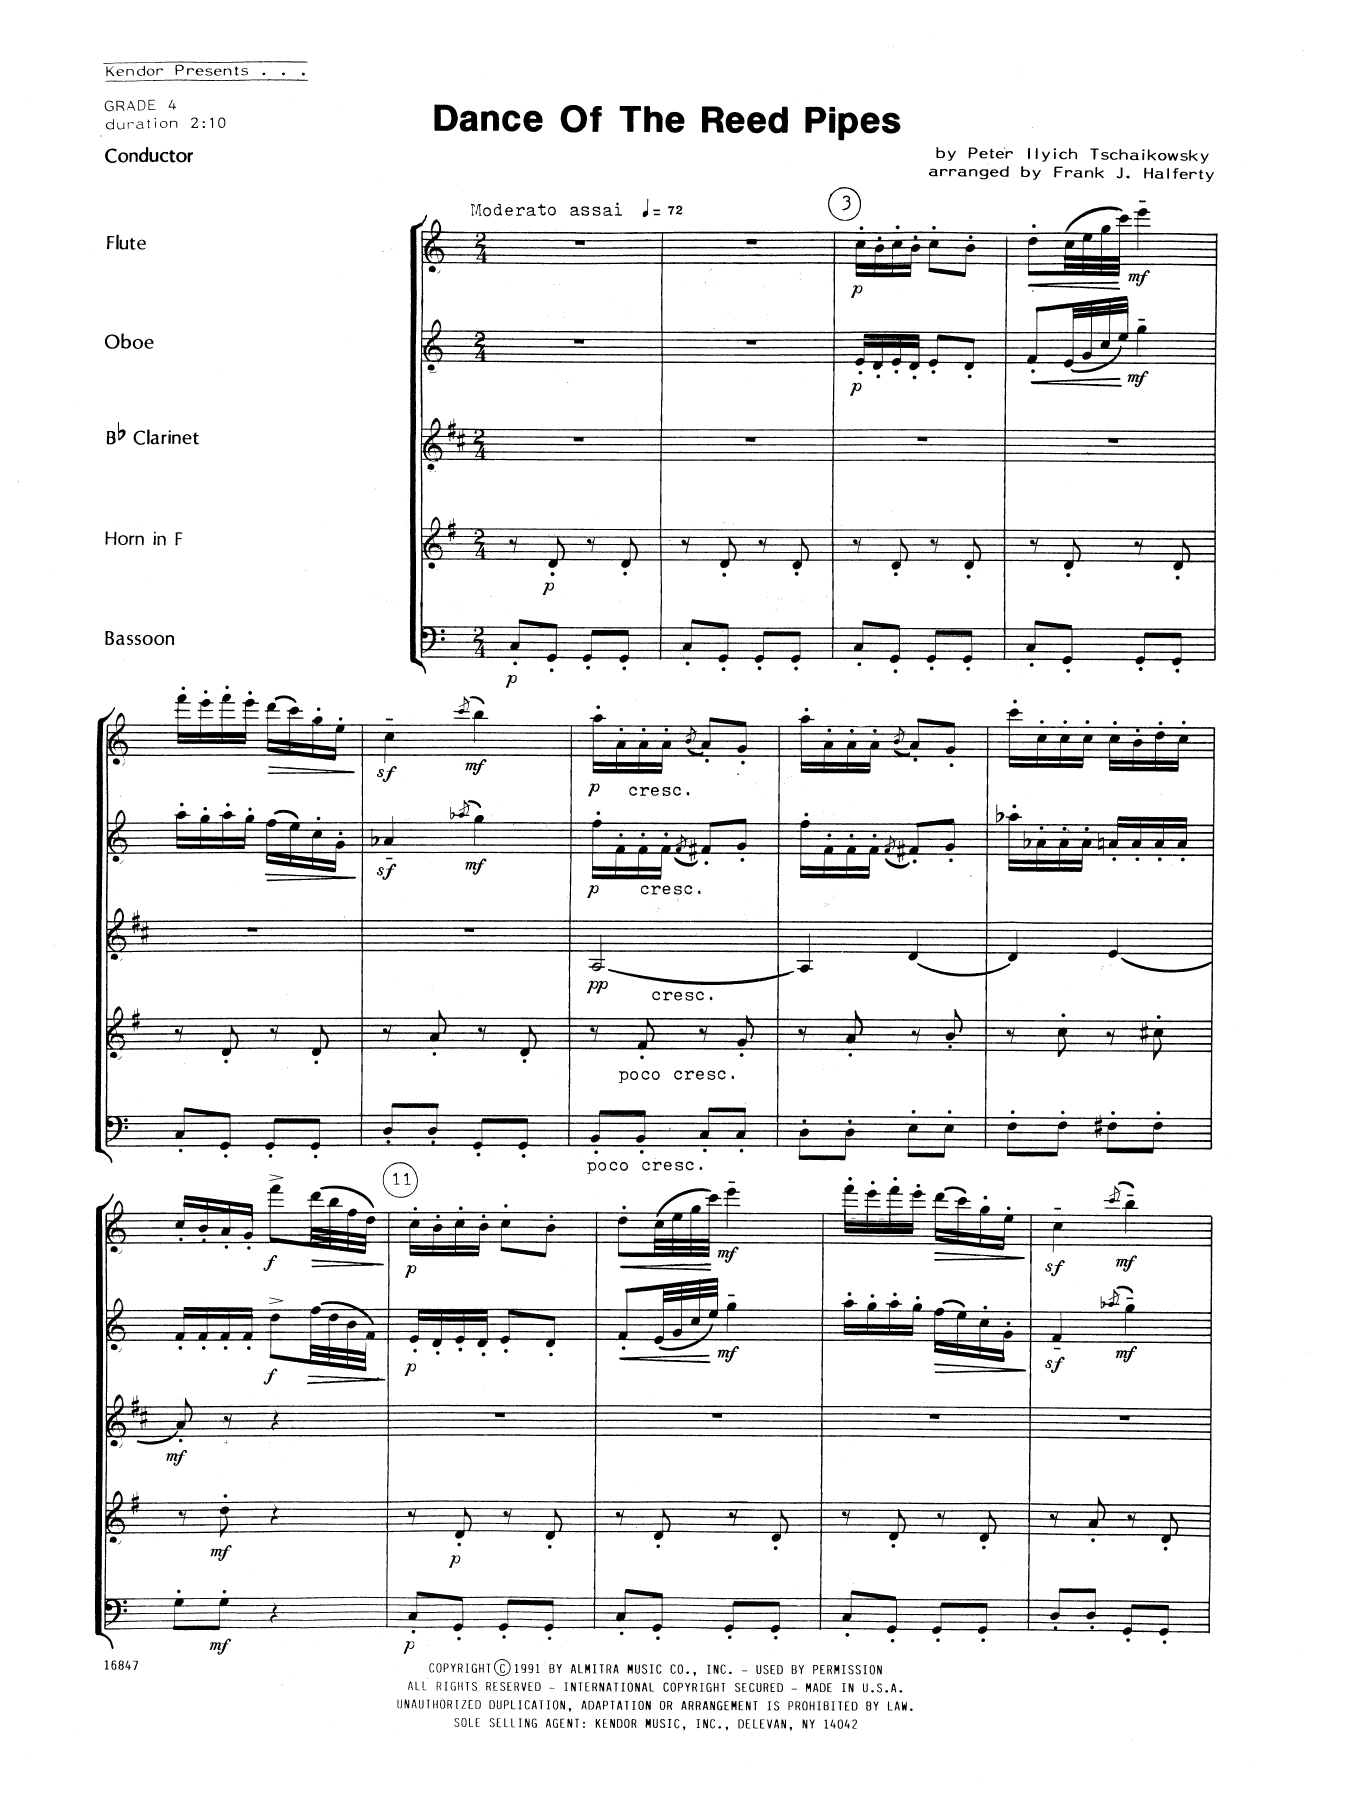 Frank J. Halferty Dance Of The Reed Pipes - Full Score sheet music notes and chords. Download Printable PDF.